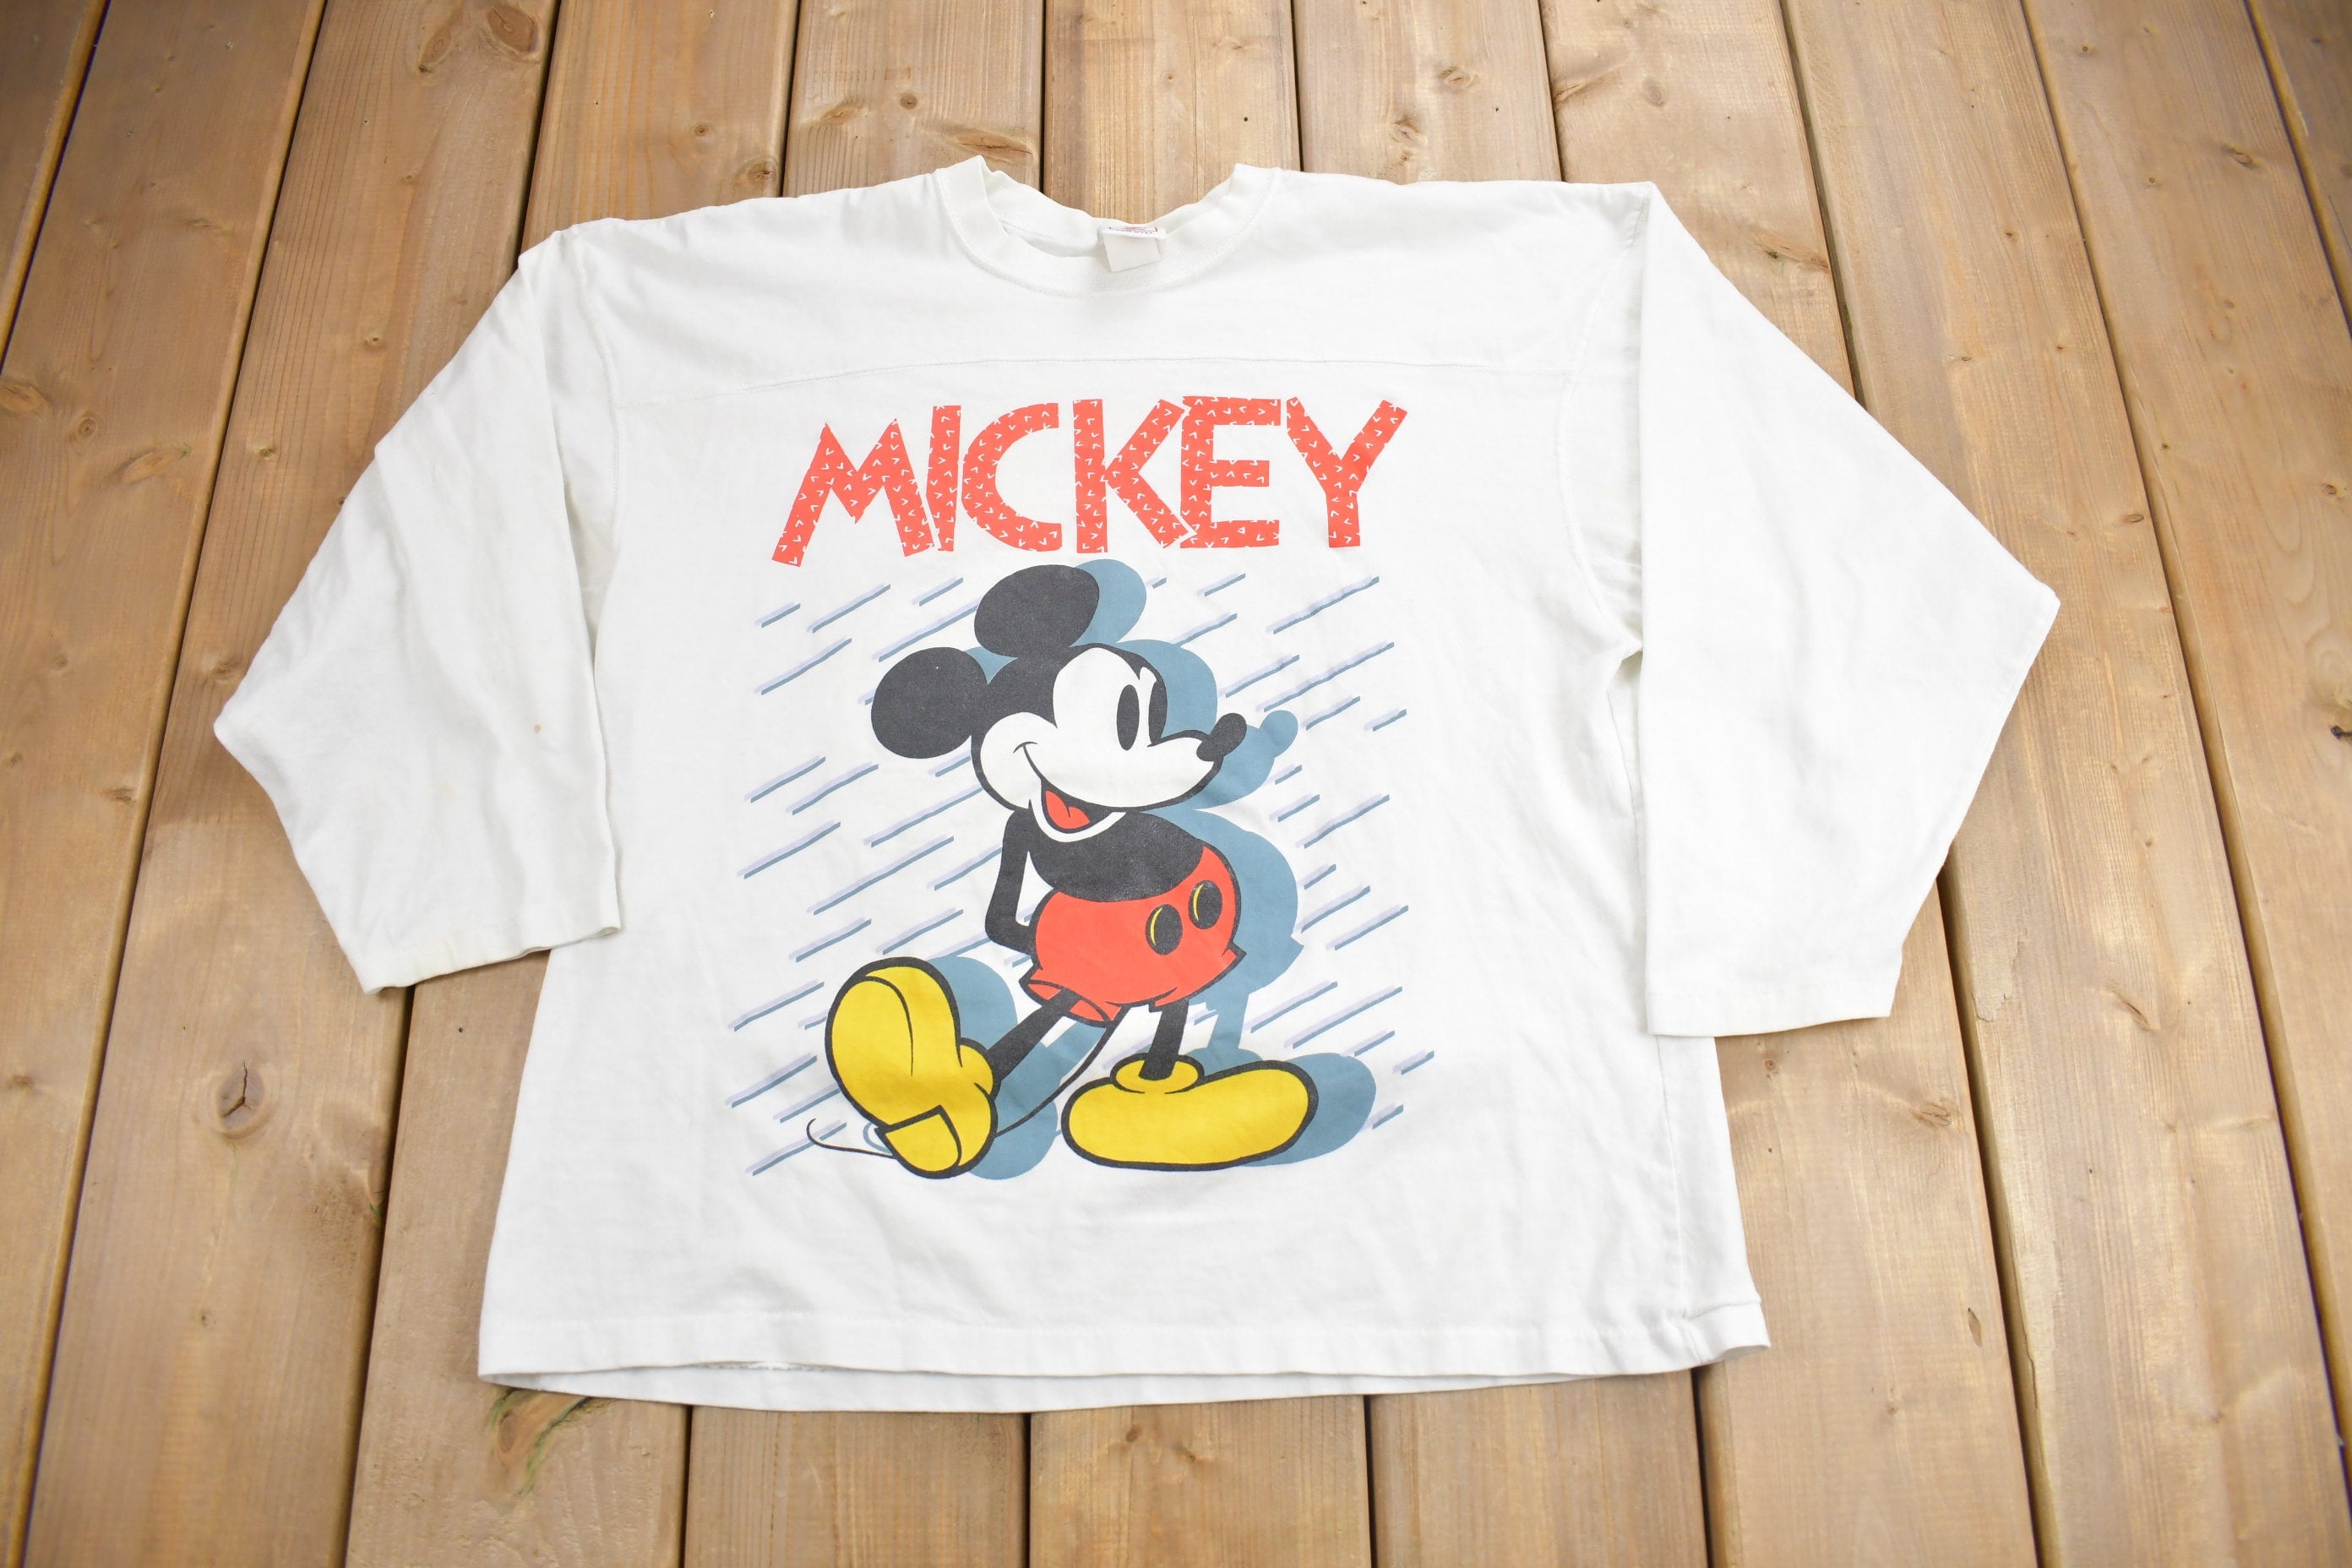 Vintage 1980s Disney Mickey Mouse Cartoon T-Shirt / 80s Graphic